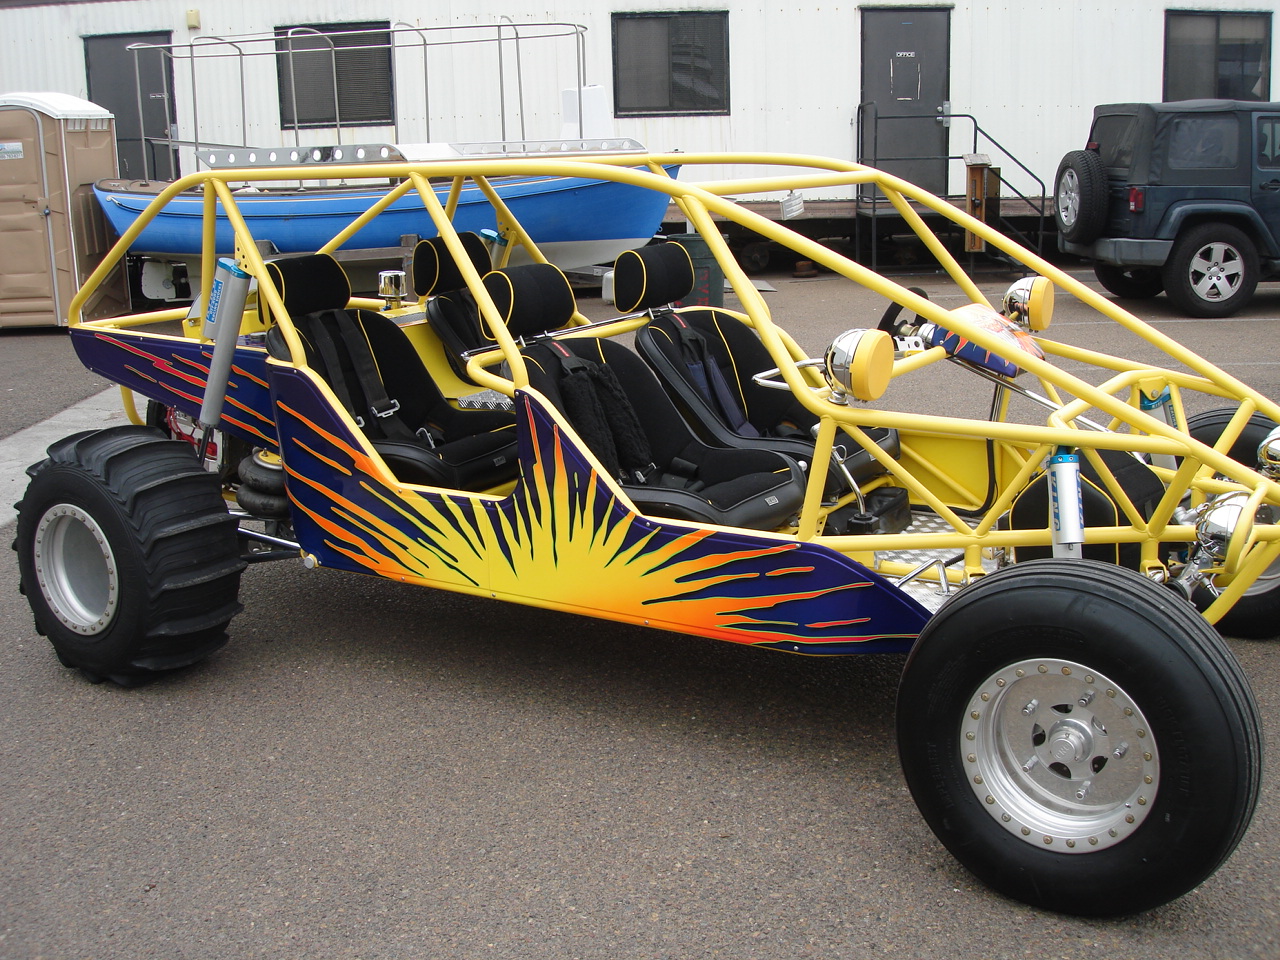 Rail Dune Buggy For Sale - ZeMotor Sand Cars Unlimited DUNE BUGGY ATVs ...